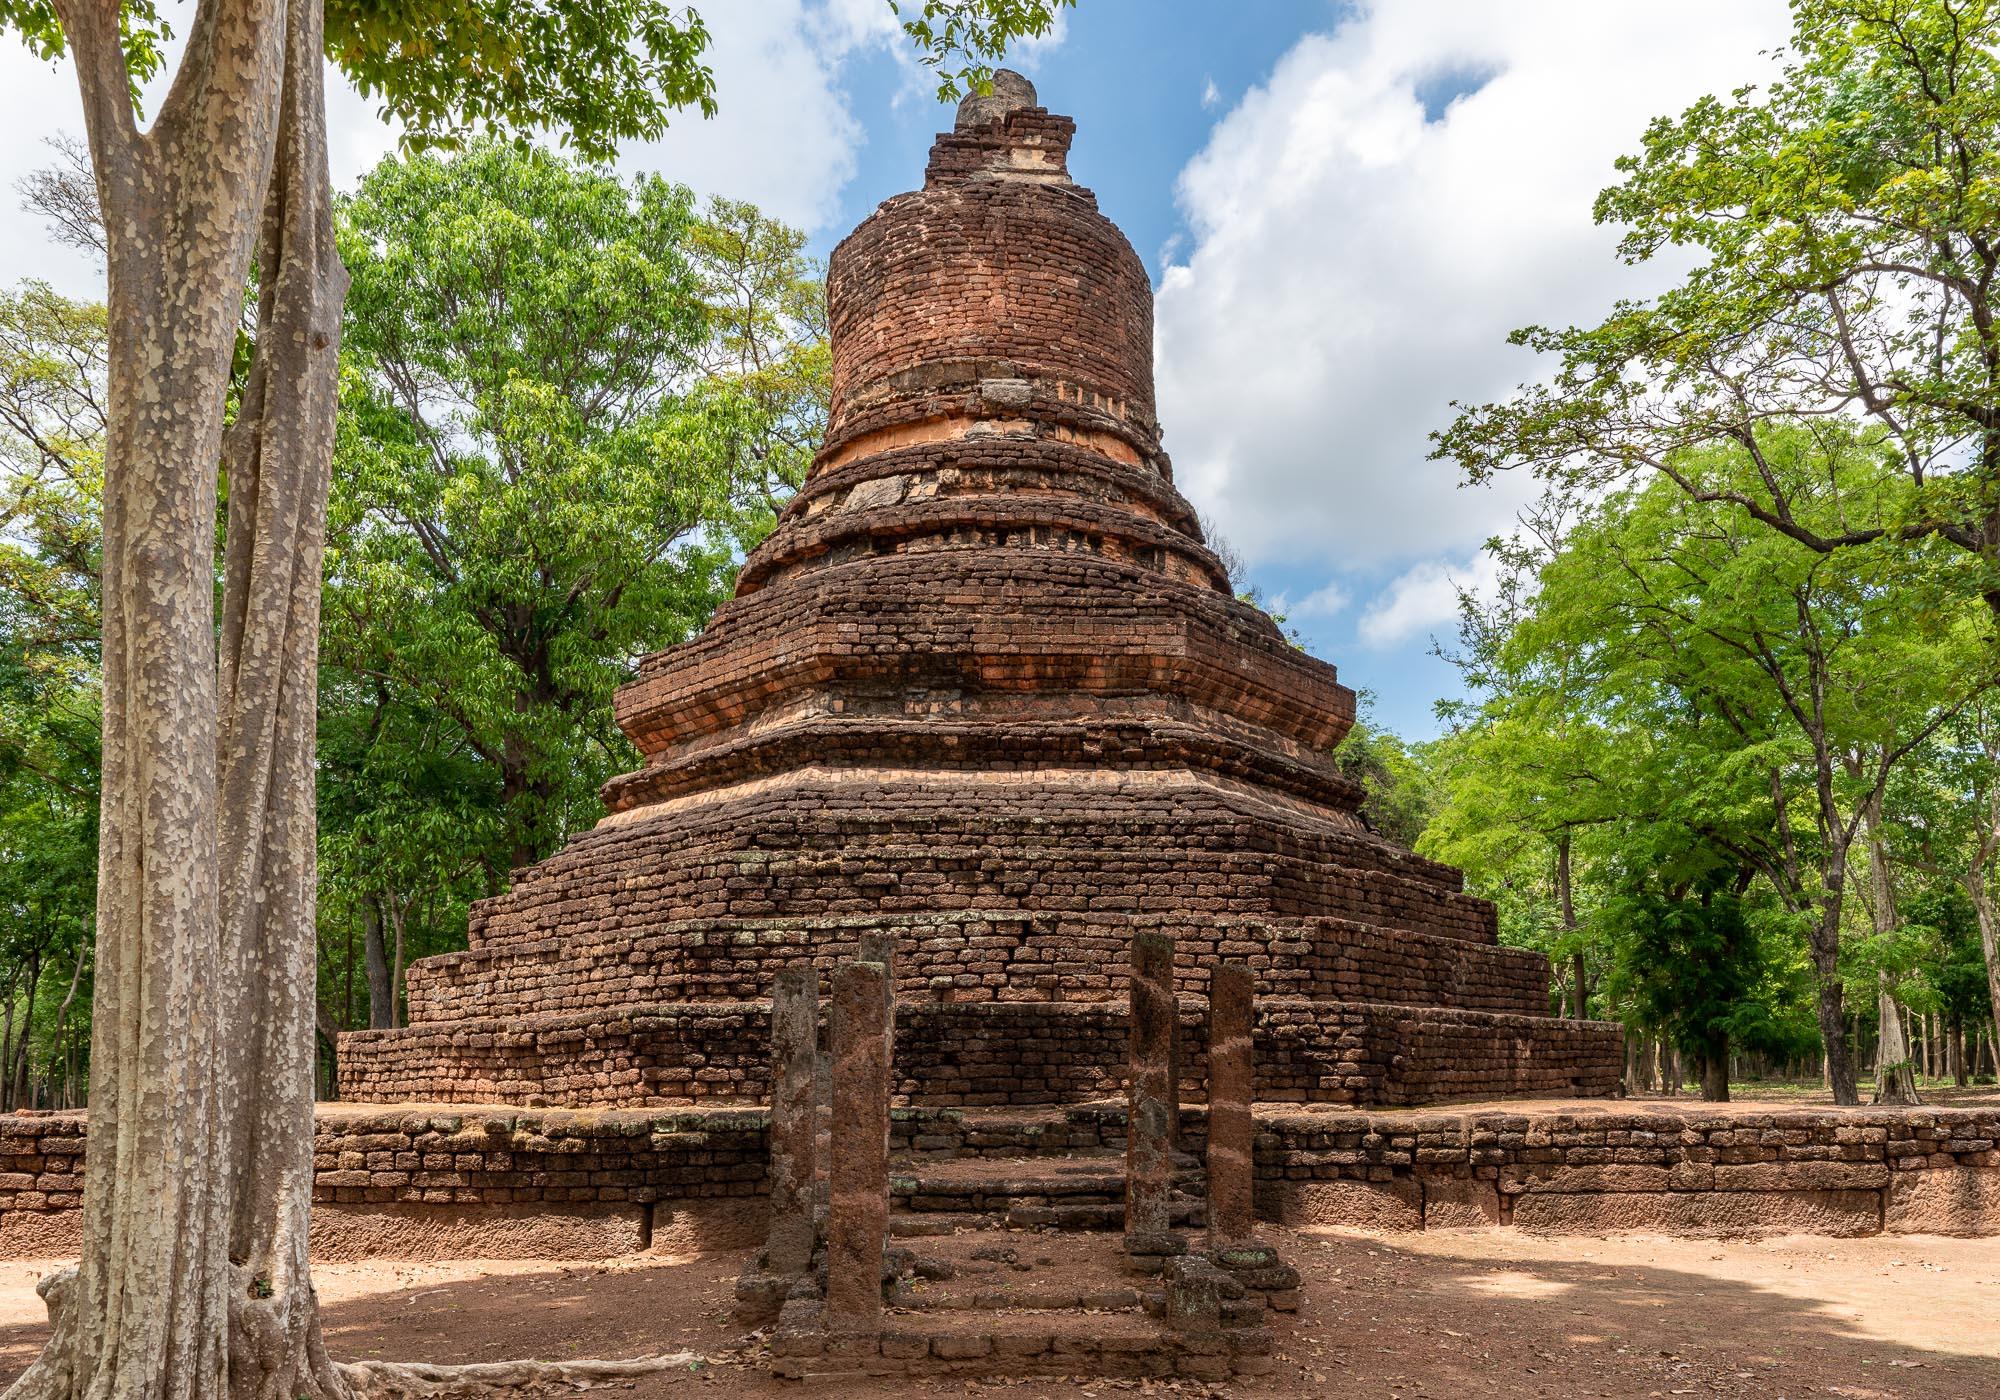 Wat Phra Non's main pagoda, which is interesting because of a mix of styles starting with an octagonal base leading up to the slender bell shape. – © Michael Turtle